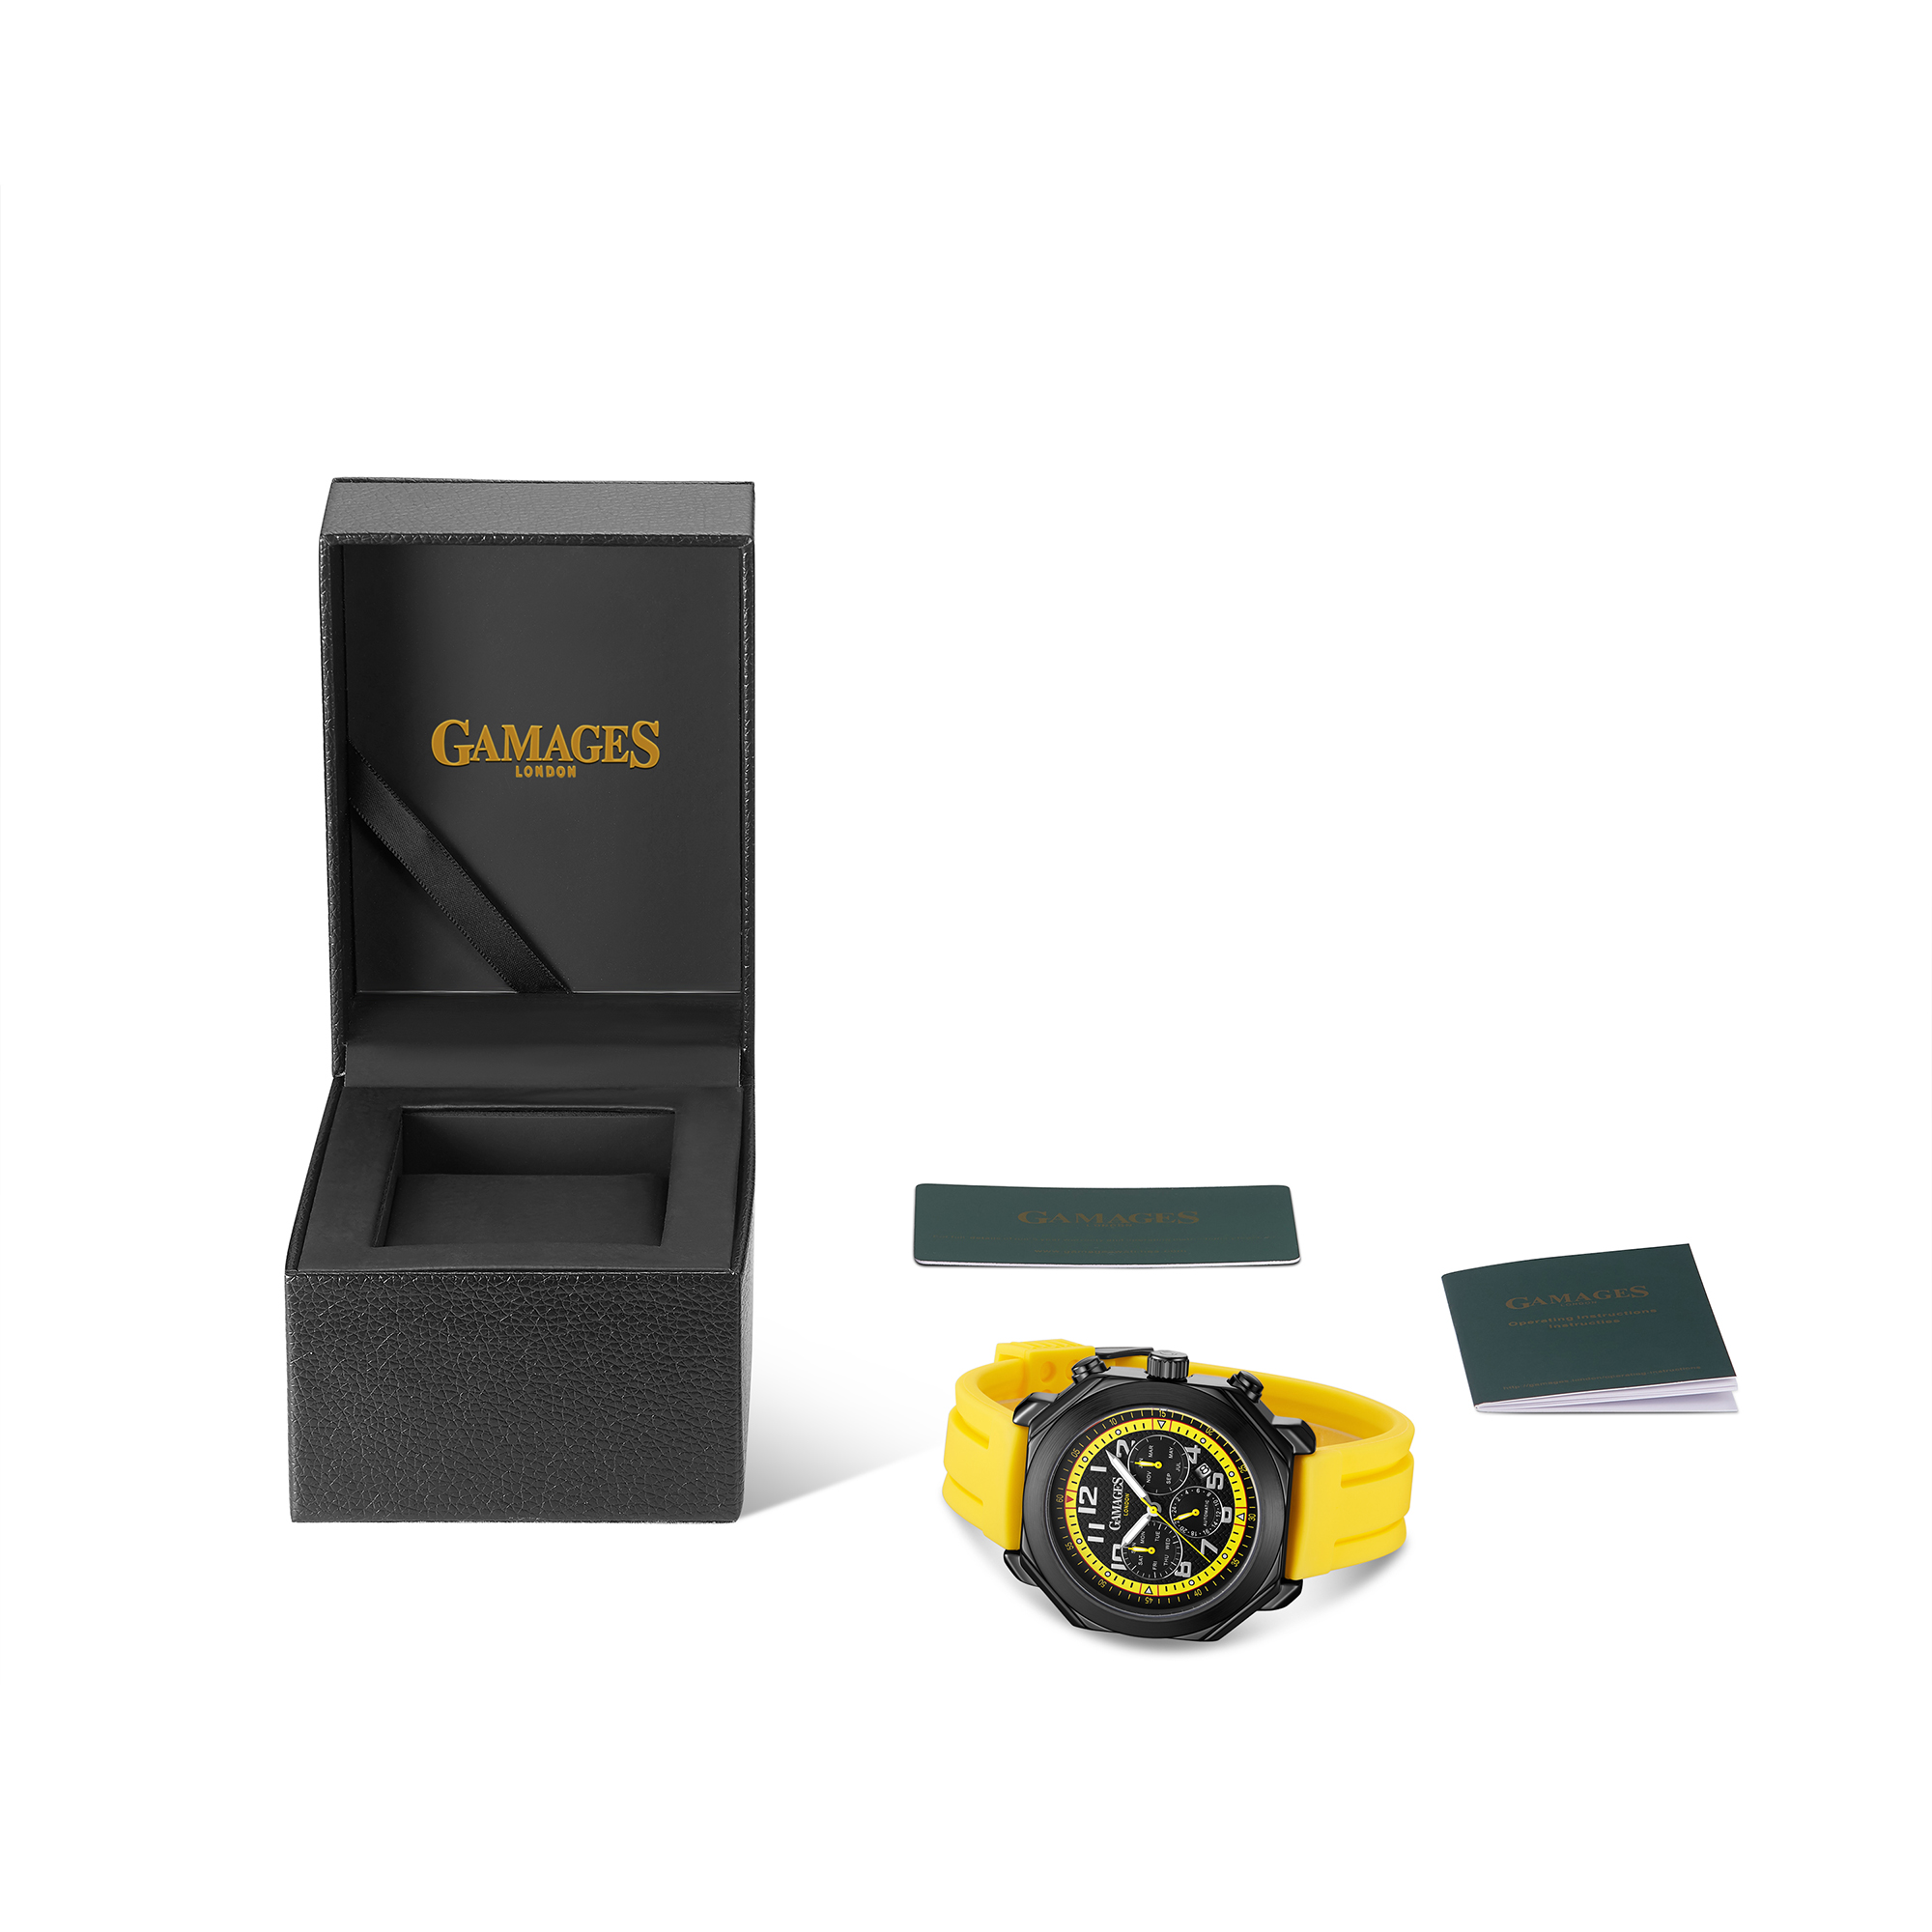 Ltd Edition Hand Assembled GAMAGES Contemporary Automatic Yellow – 5 Year Warranty & Free Delivery - Image 4 of 5